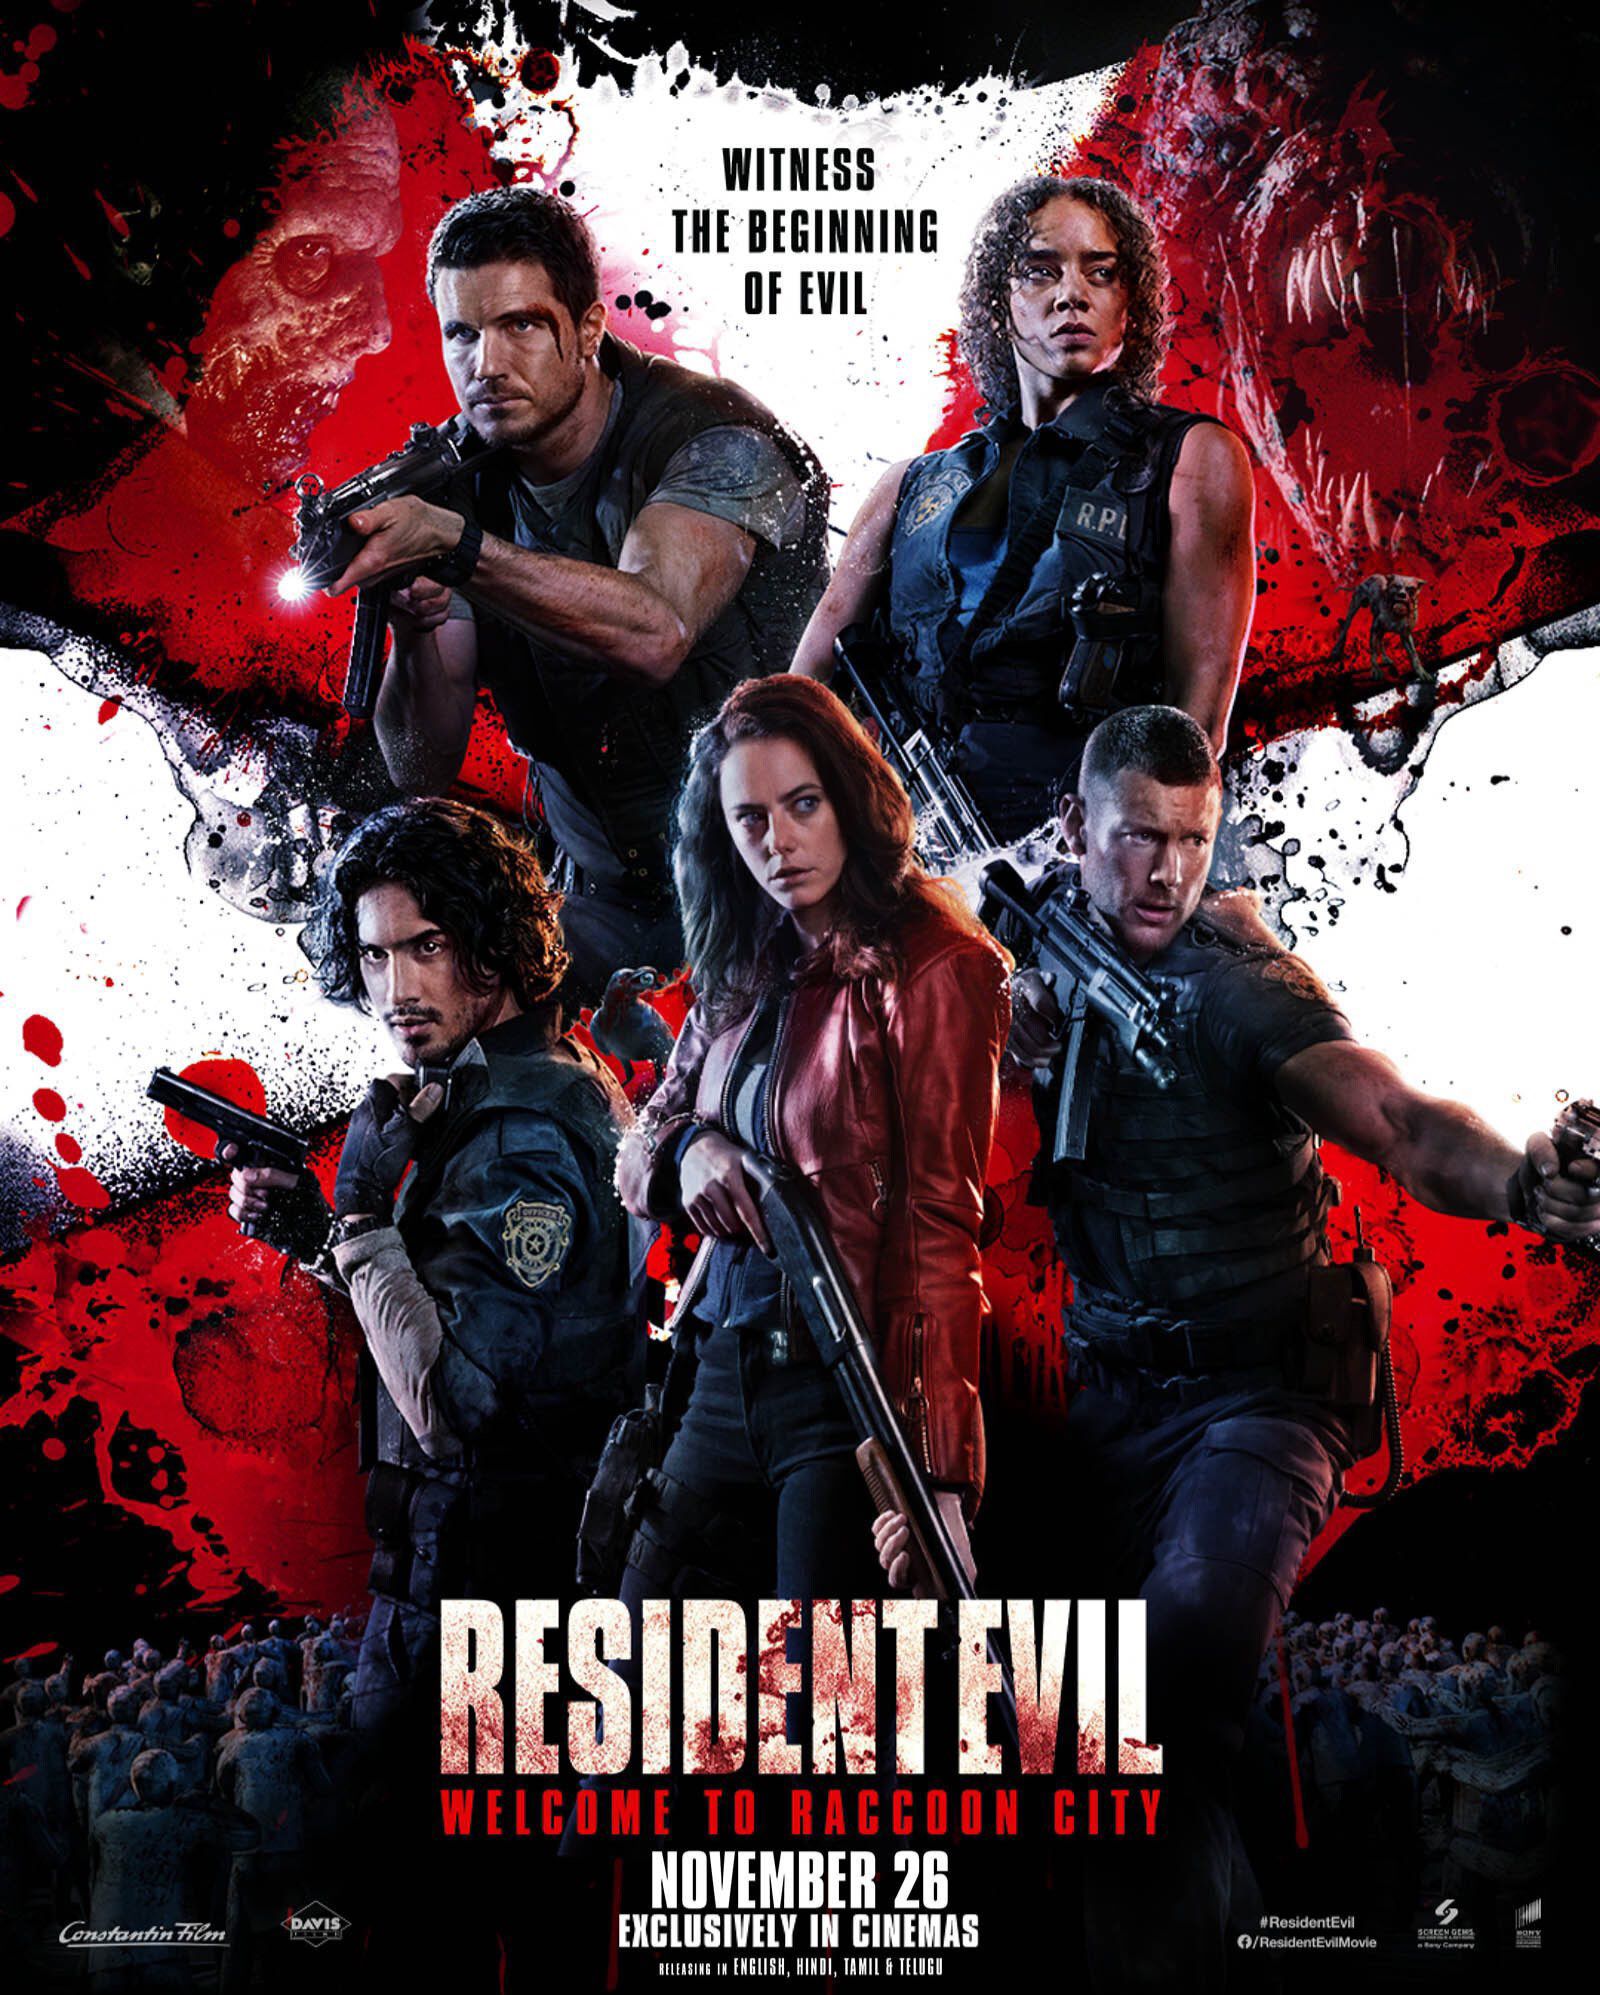 Resident Evil Welcome to Raccoon City image #2